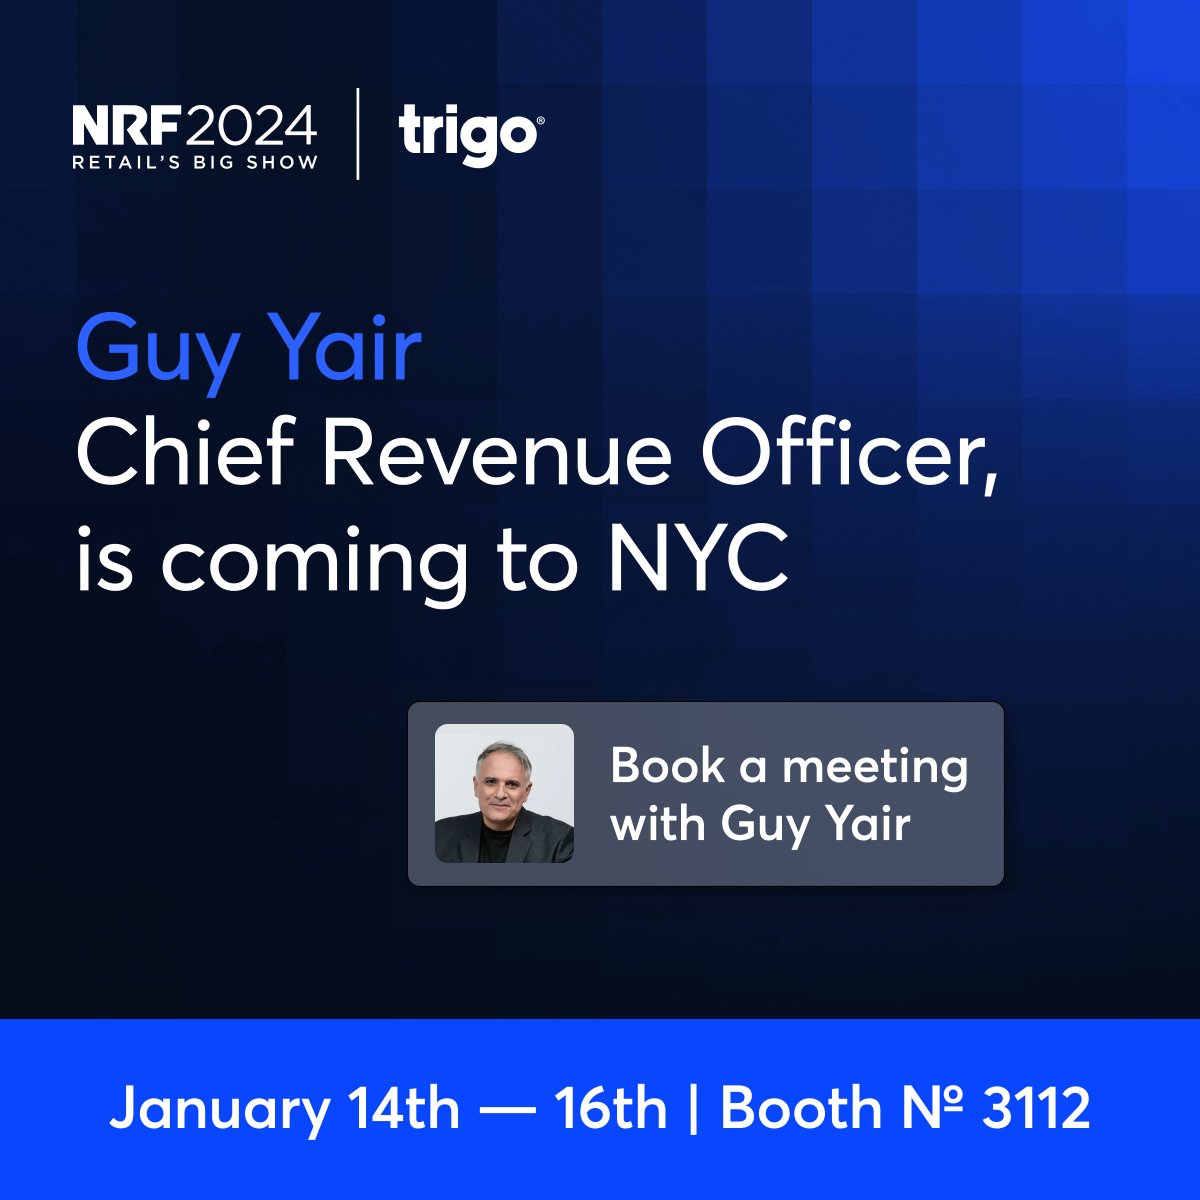 Looking to innovate and streamline the operations of your retail business? Don't miss the chance to engage one-on-one with Trigo's CRO, Guy Yair, at NRF'24! Book your meeting now: bit.ly/3uWapFb @NRFnews @NRFBigShow